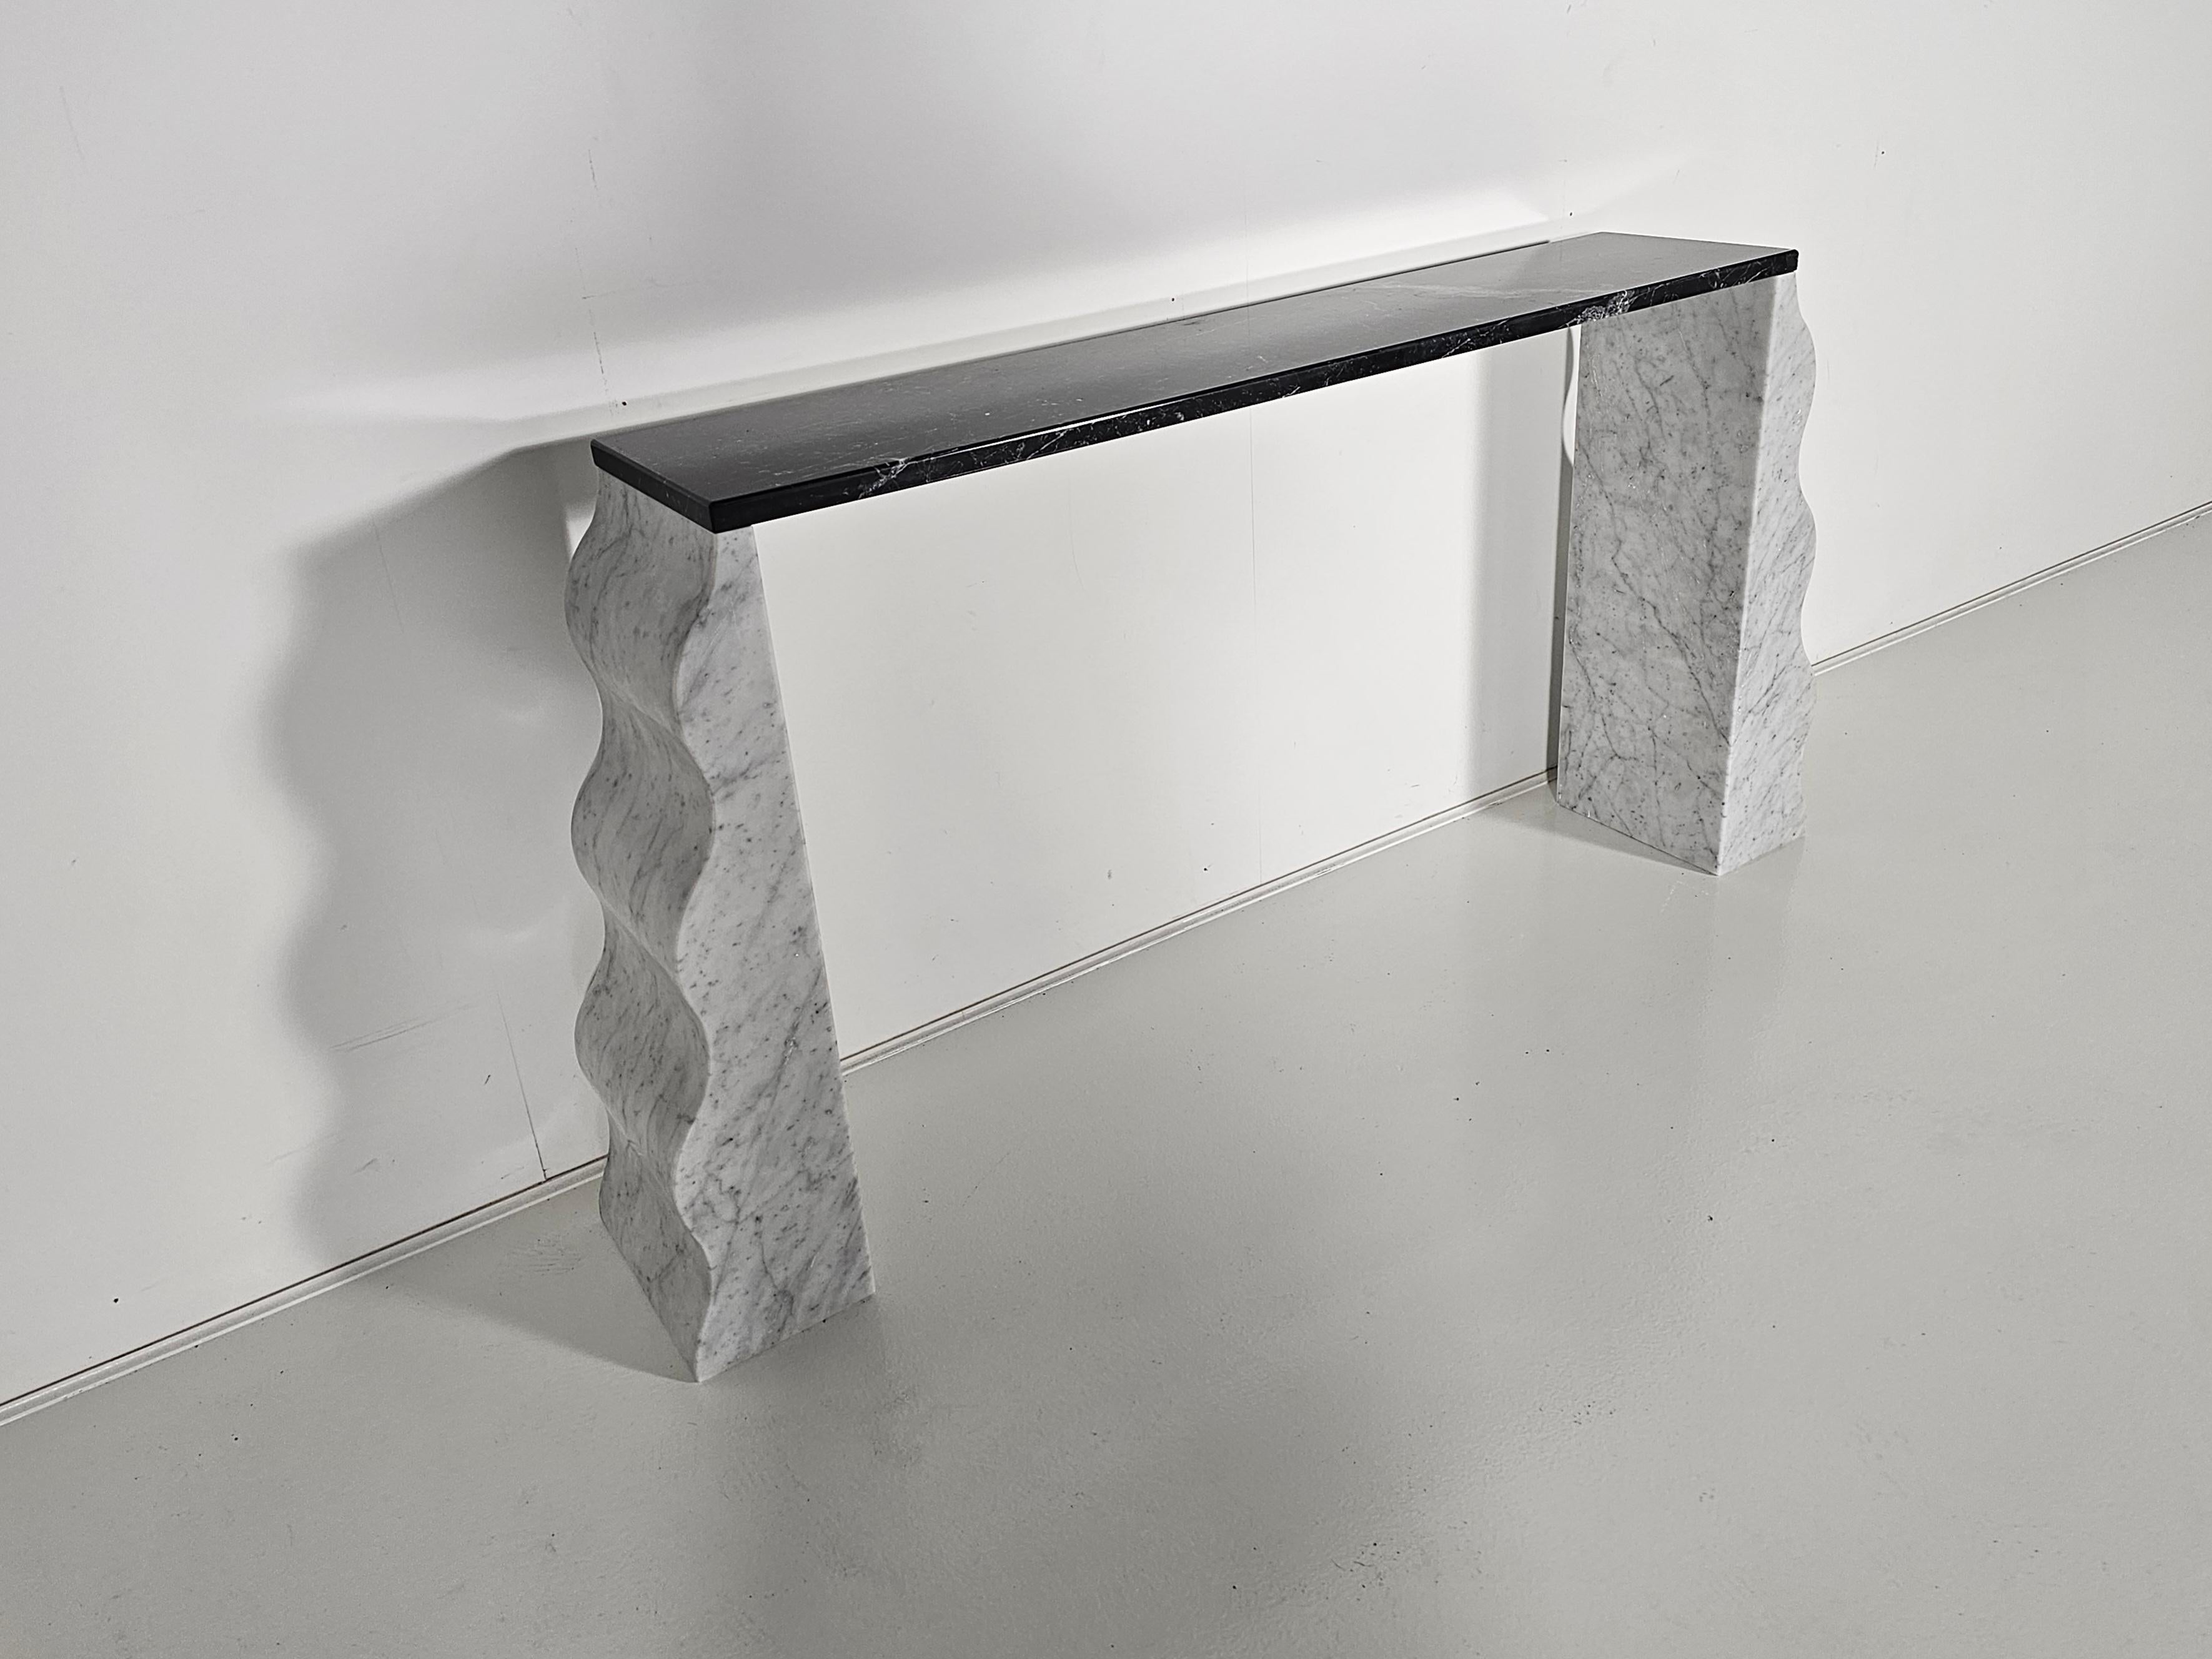 European Marble Montenegro Console Table by Ettore Sottsass for Ultima Edizione, 1980s For Sale